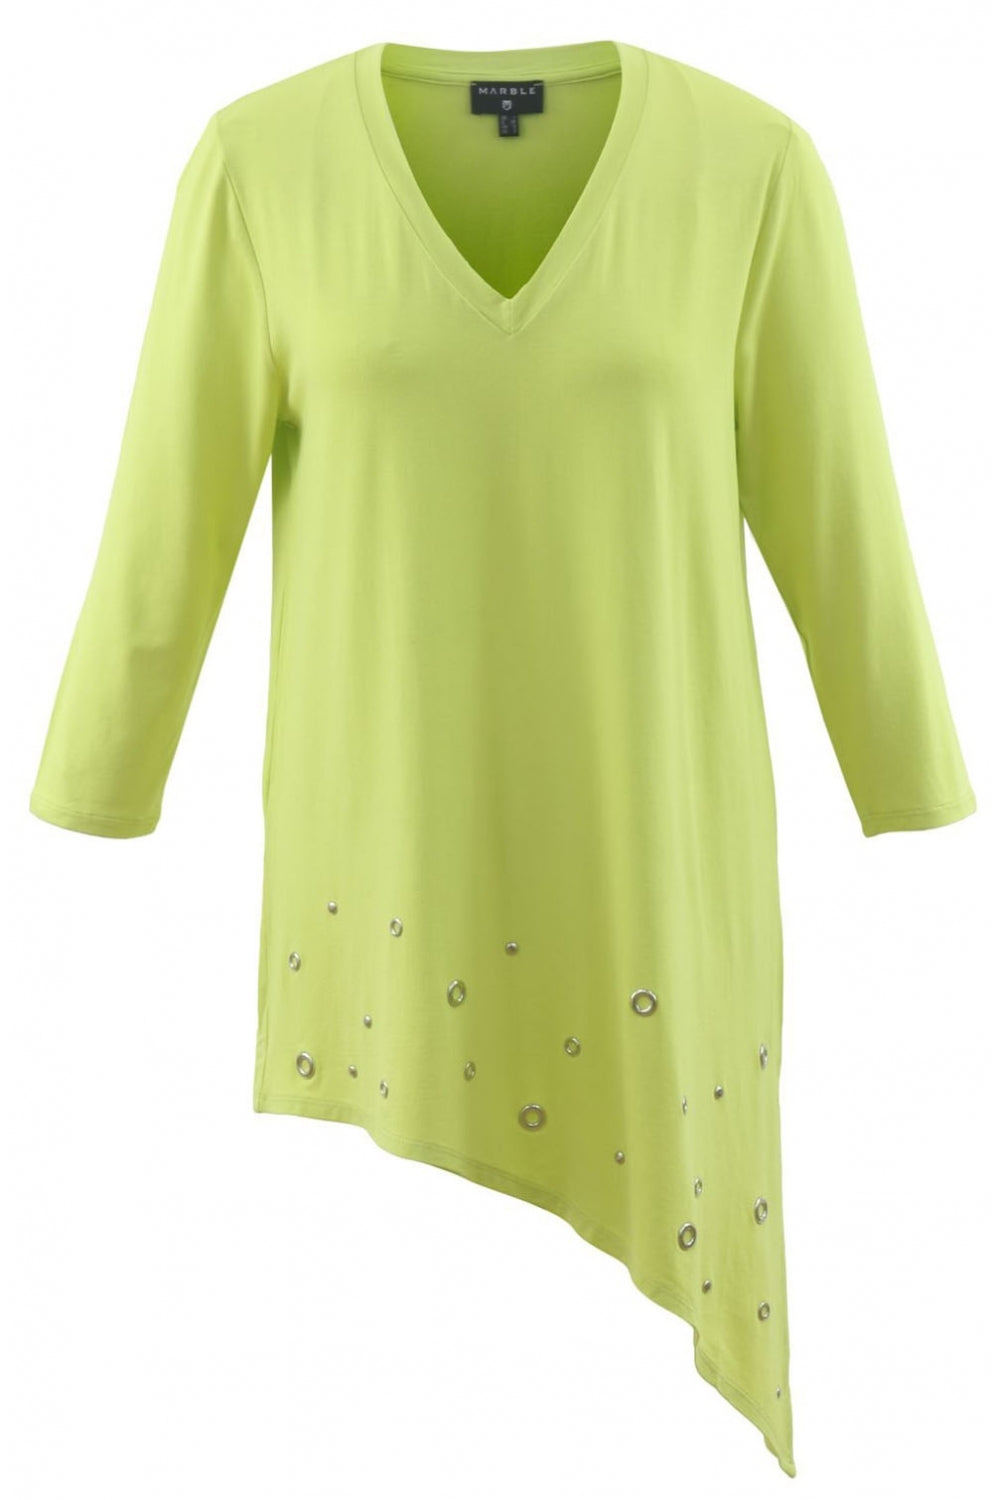 MARBLE 5727 LIME TOP COL 163